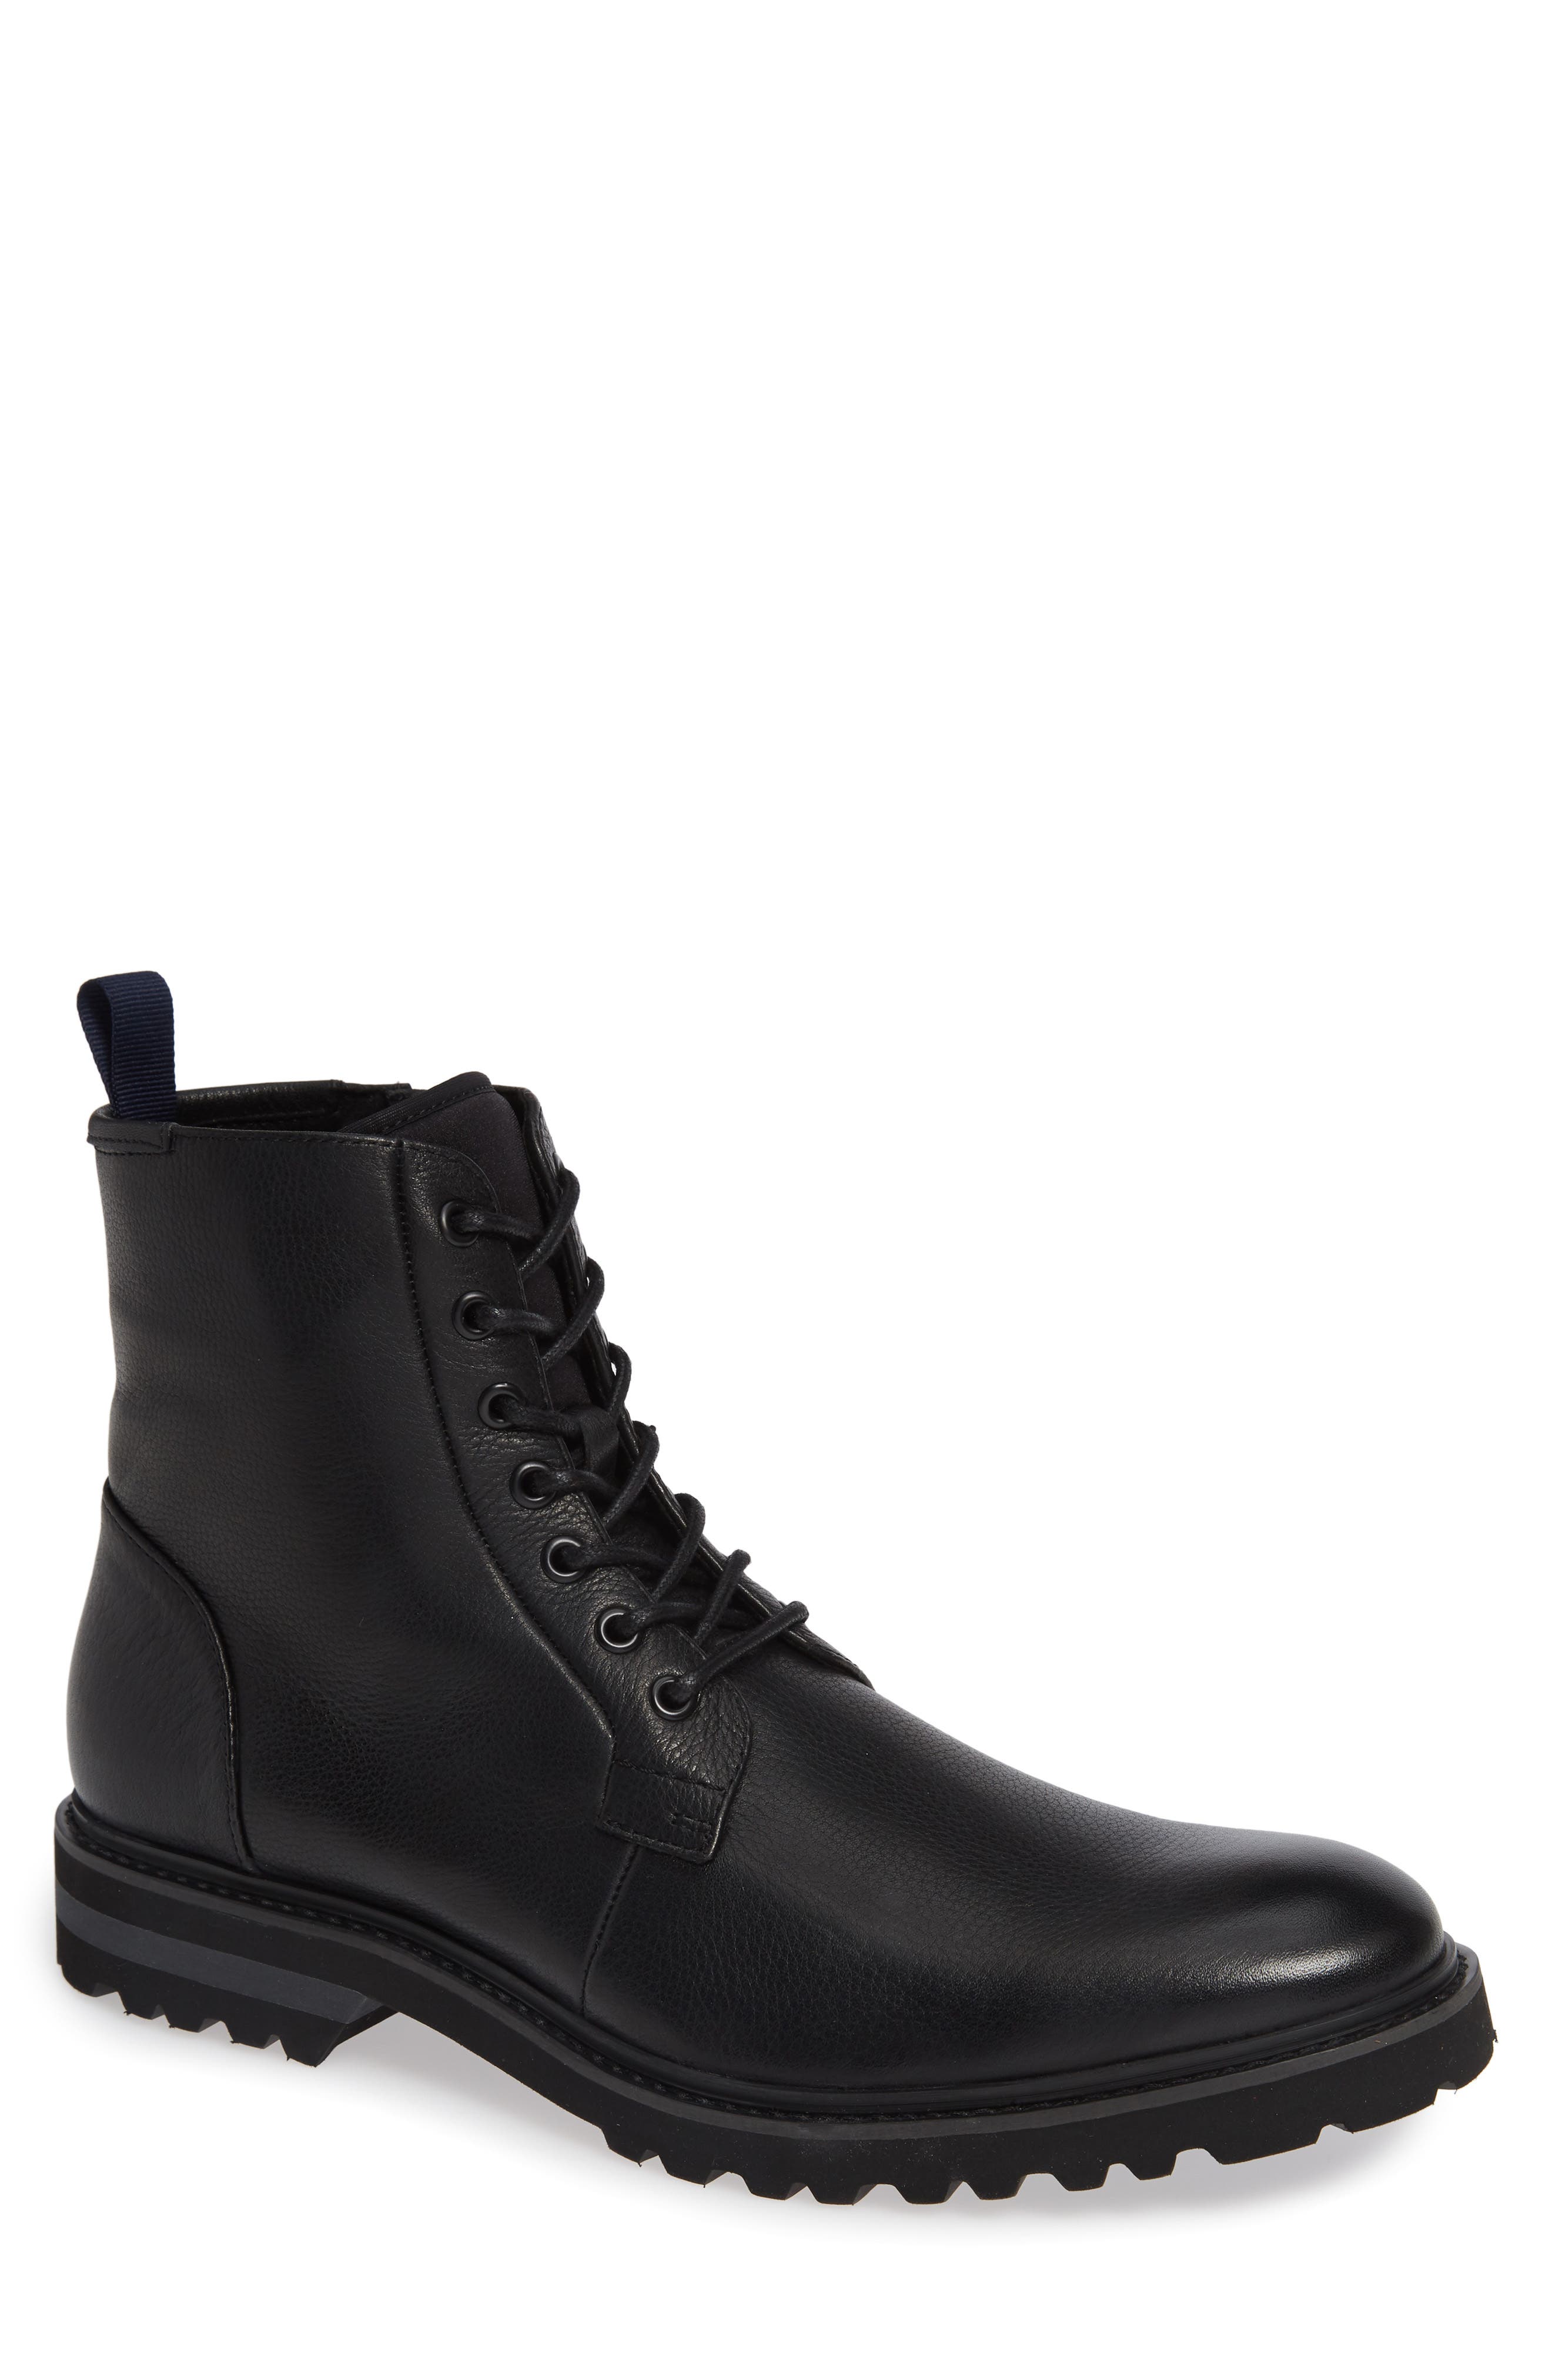 Reaction Kenneth Cole Jace Lace-Up Boot 